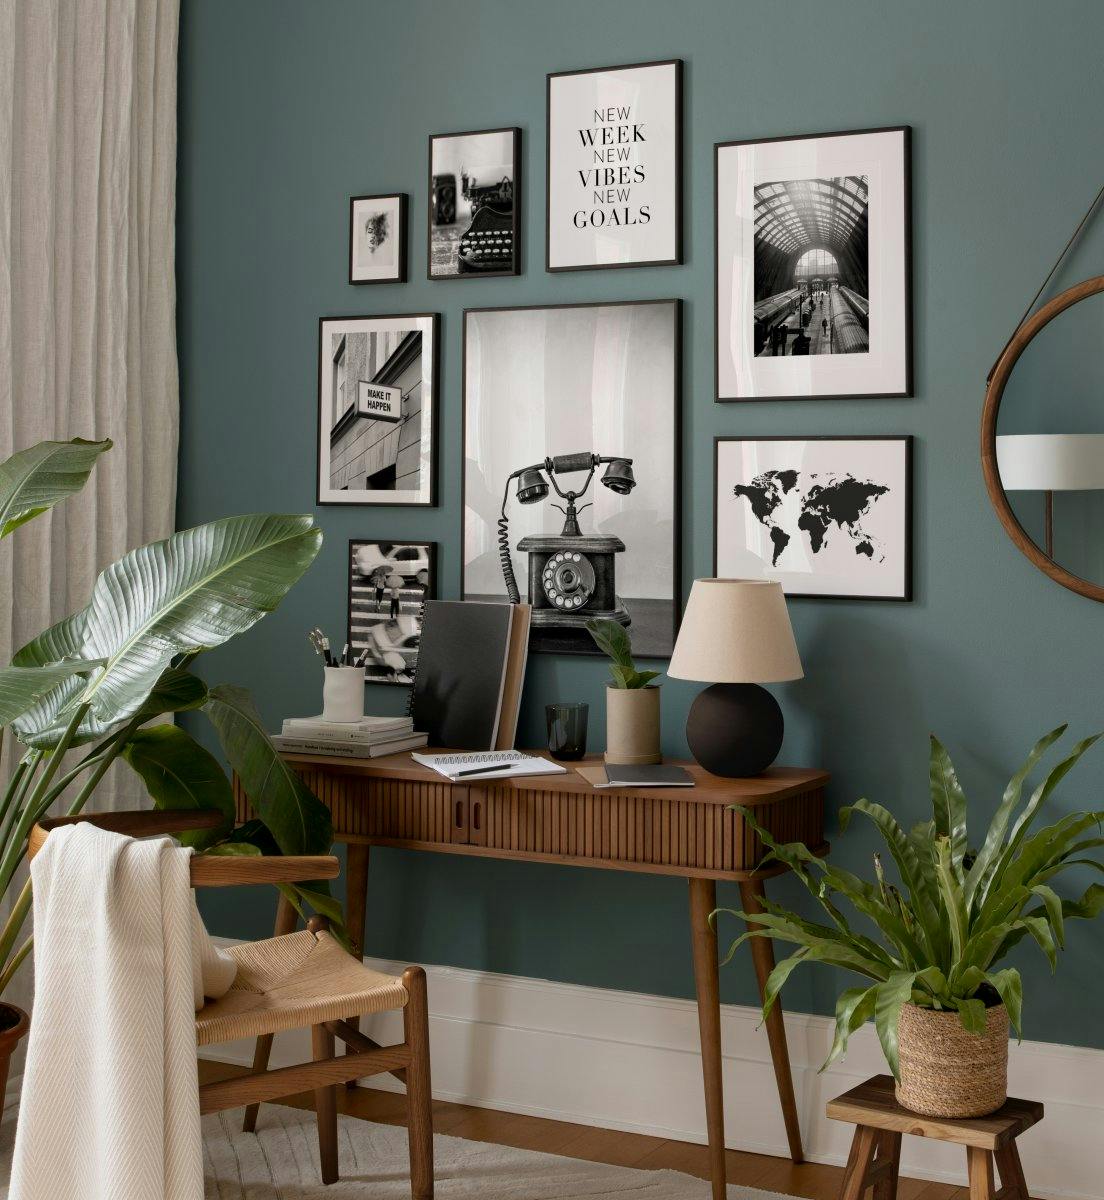 Monochrome and old fashioned photographs and illustrations perfect for the home office